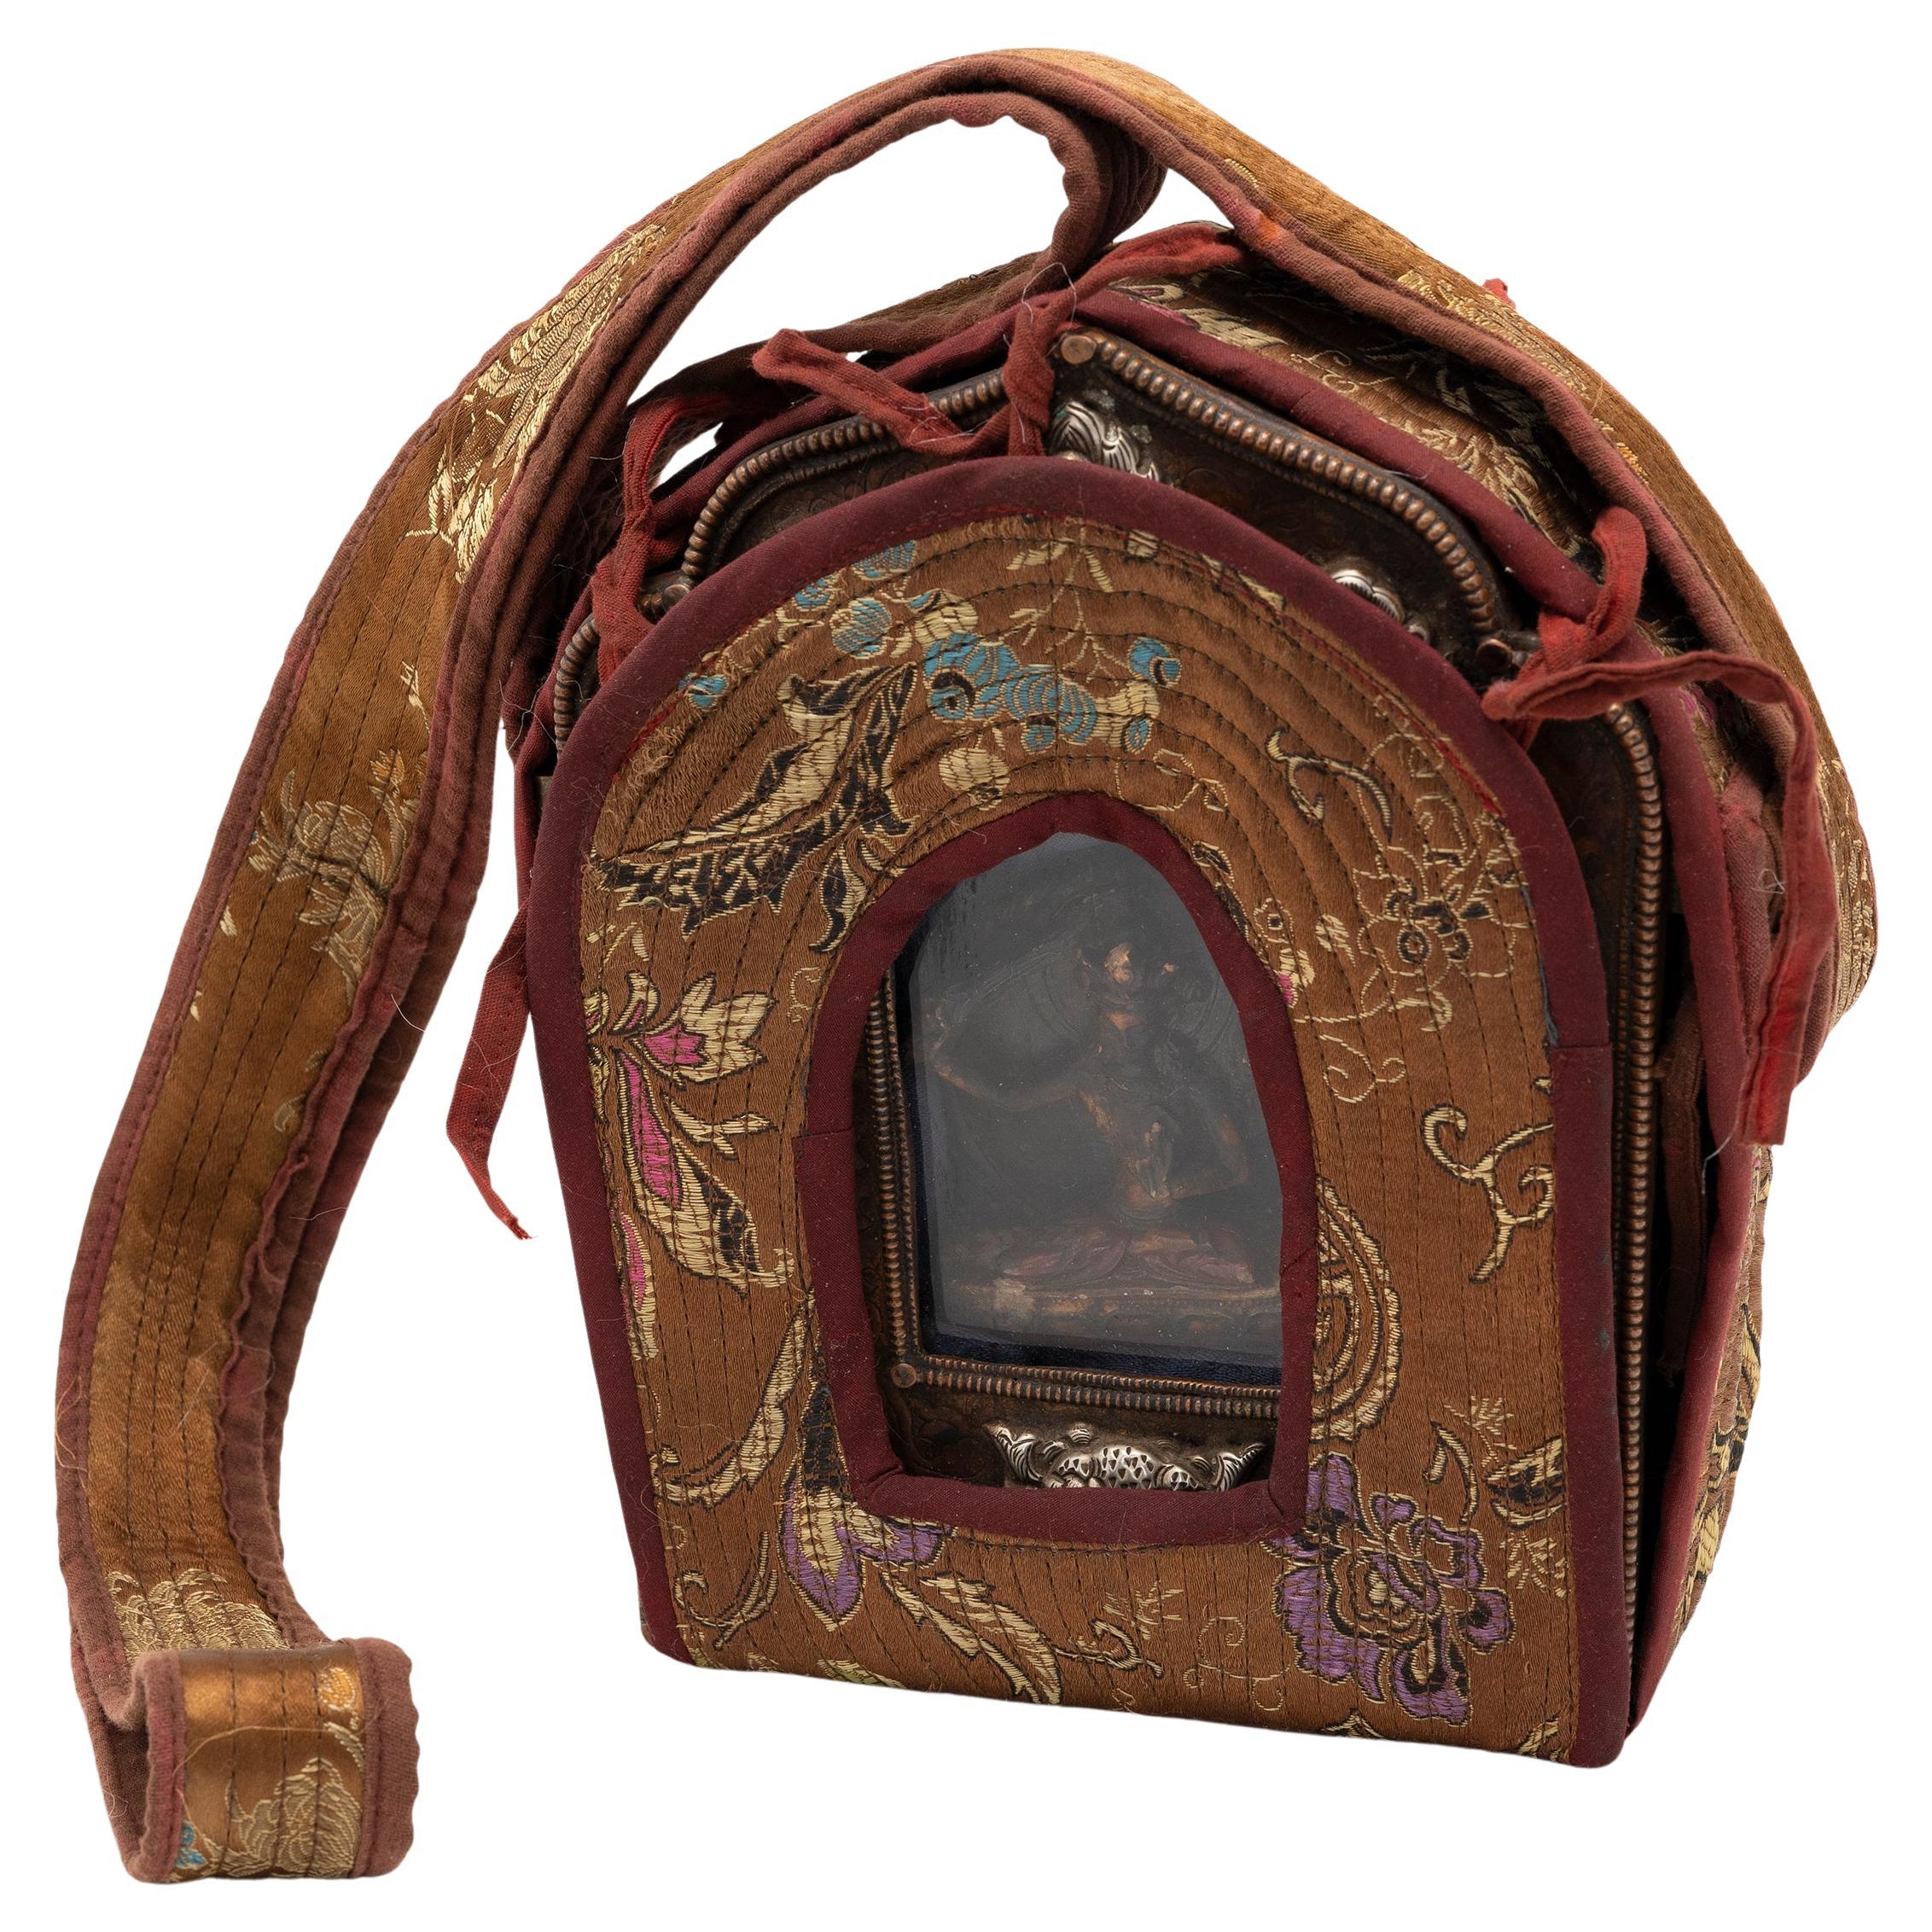 Tibetan traveling shrines, known as Gau, were believed to offer protective powers and were used to hold and carry sacred objects during long journeys. Crafted over a century ago, Buddhist followers may have purchased this intricate gau while on